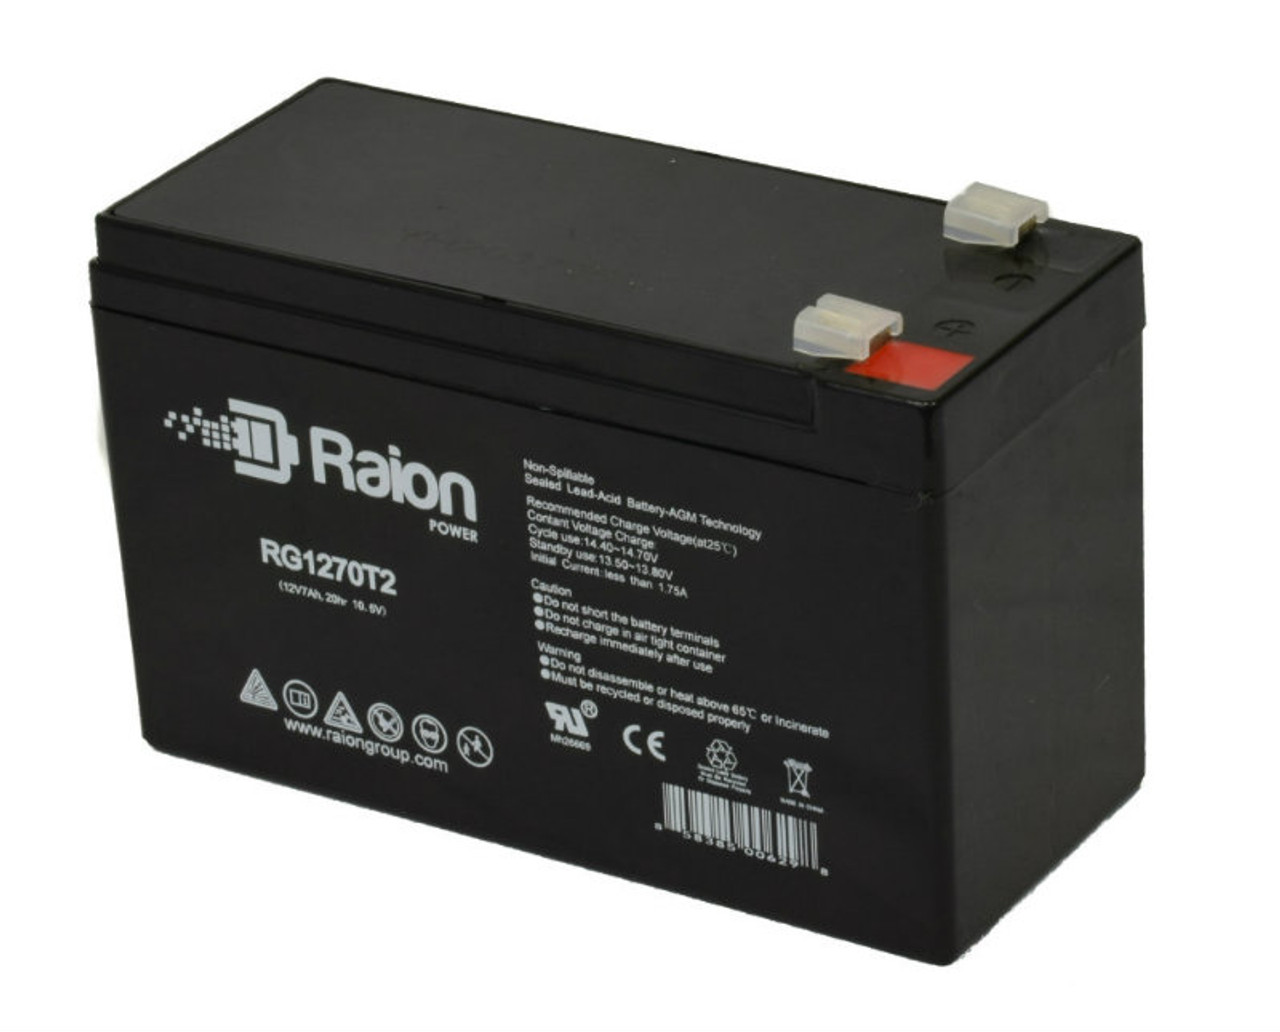 Raion Power RG1270T1 12V 7Ah Non-Spillable Replacement Battery for Panasonic LC-R127R2P/P1